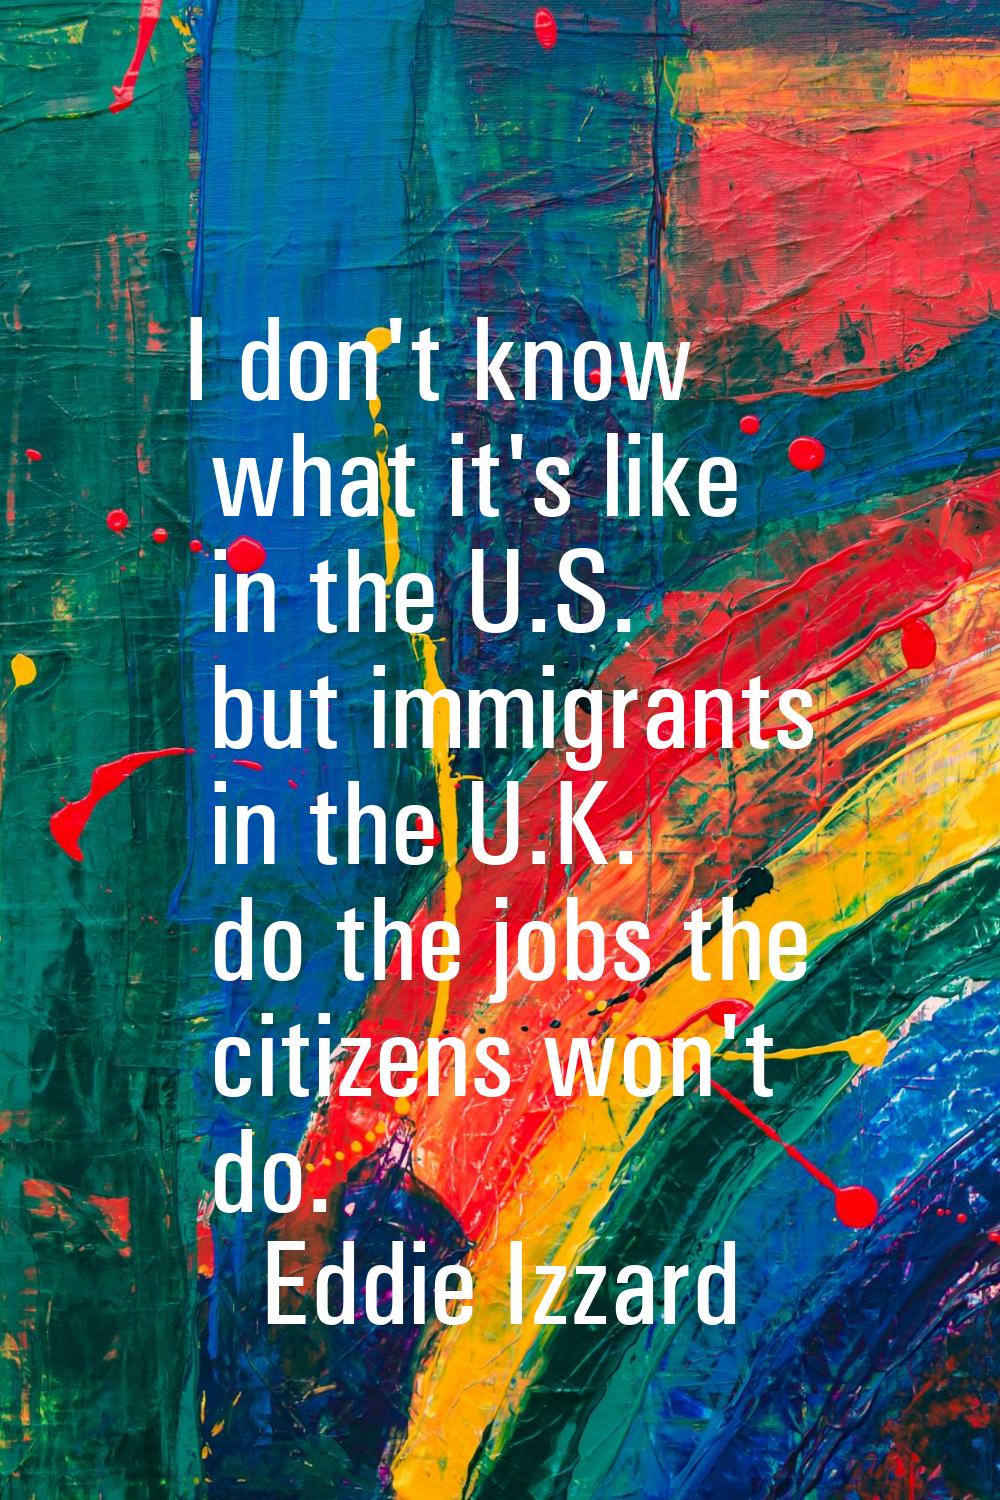 I don't know what it's like in the U.S. but immigrants in the U.K. do the jobs the citizens won't d